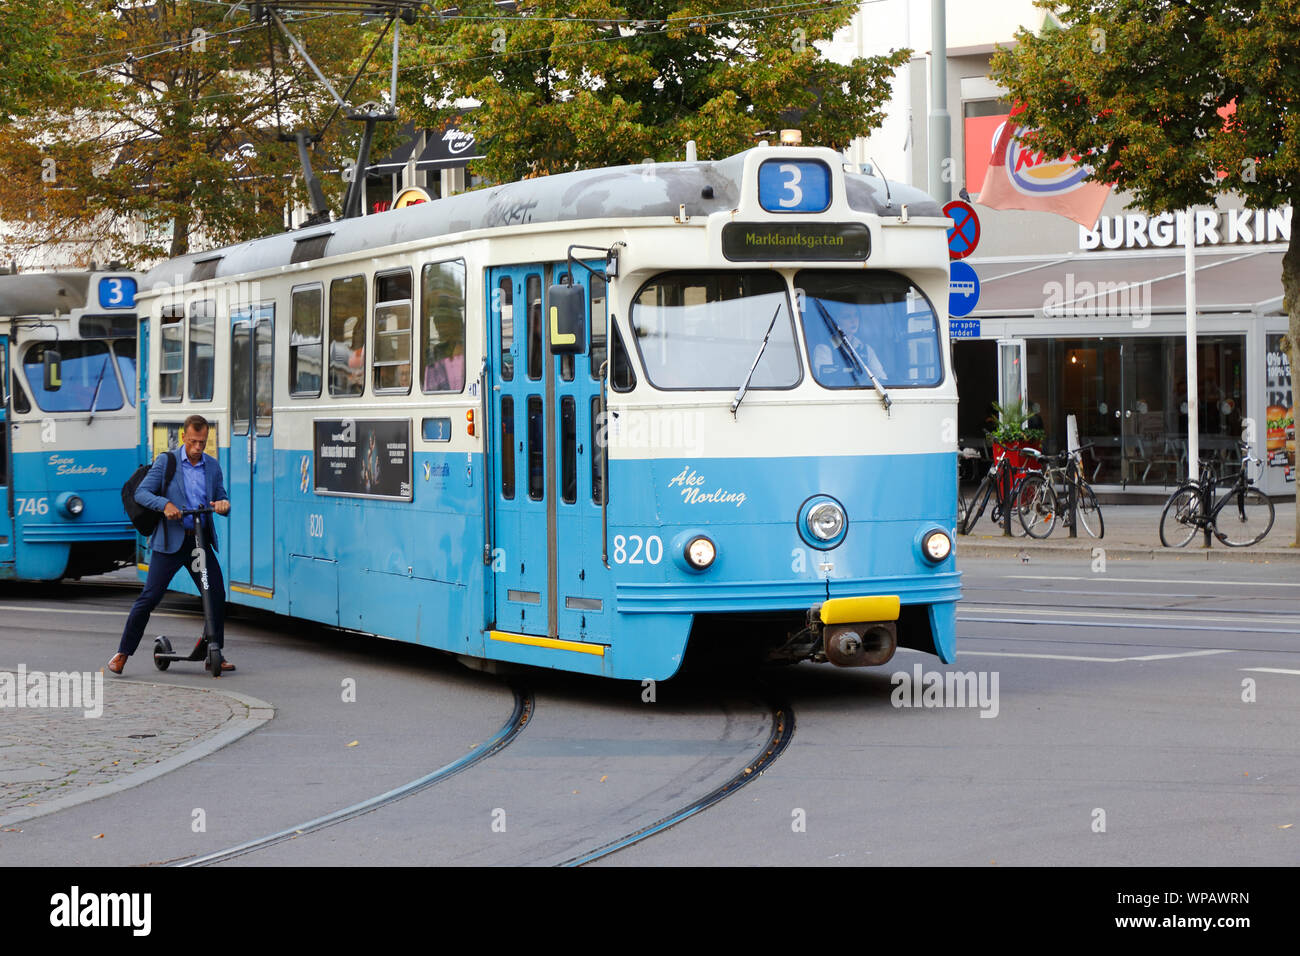 Gothenburg, Sweden - September 2, 2019: Tram of class M29 and man on an electric scooter. Stock Photo